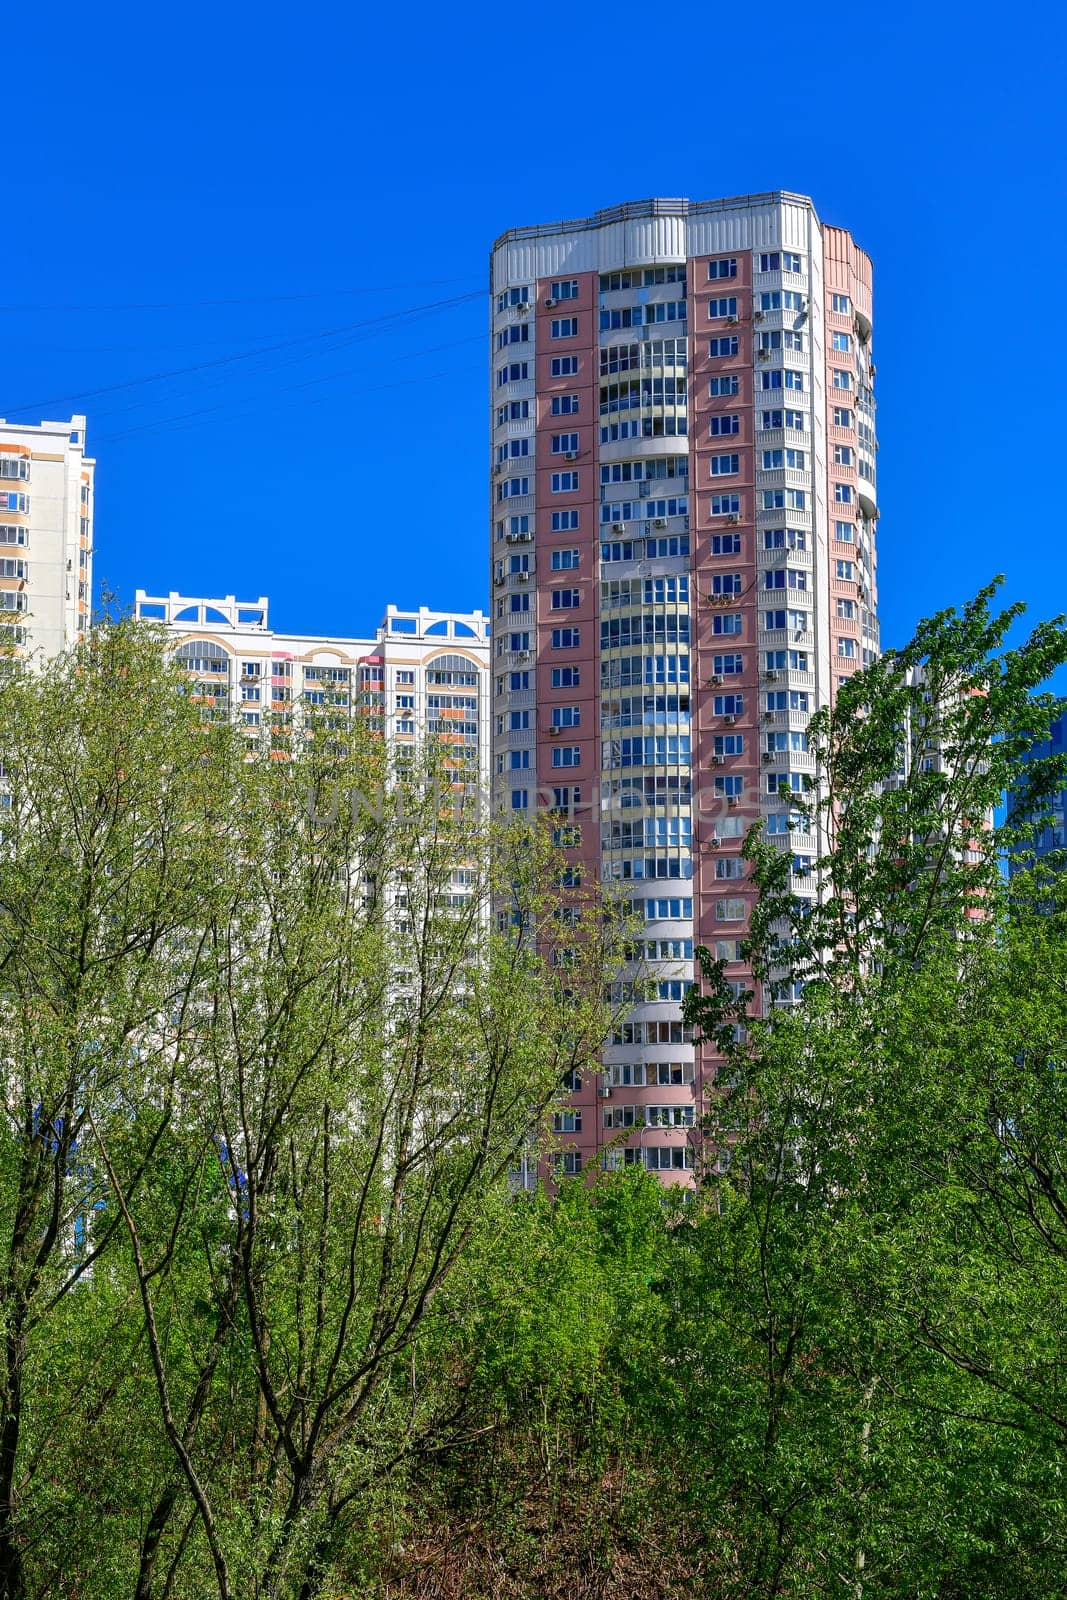 City houses surrounded by trees in the Moscow, Russia